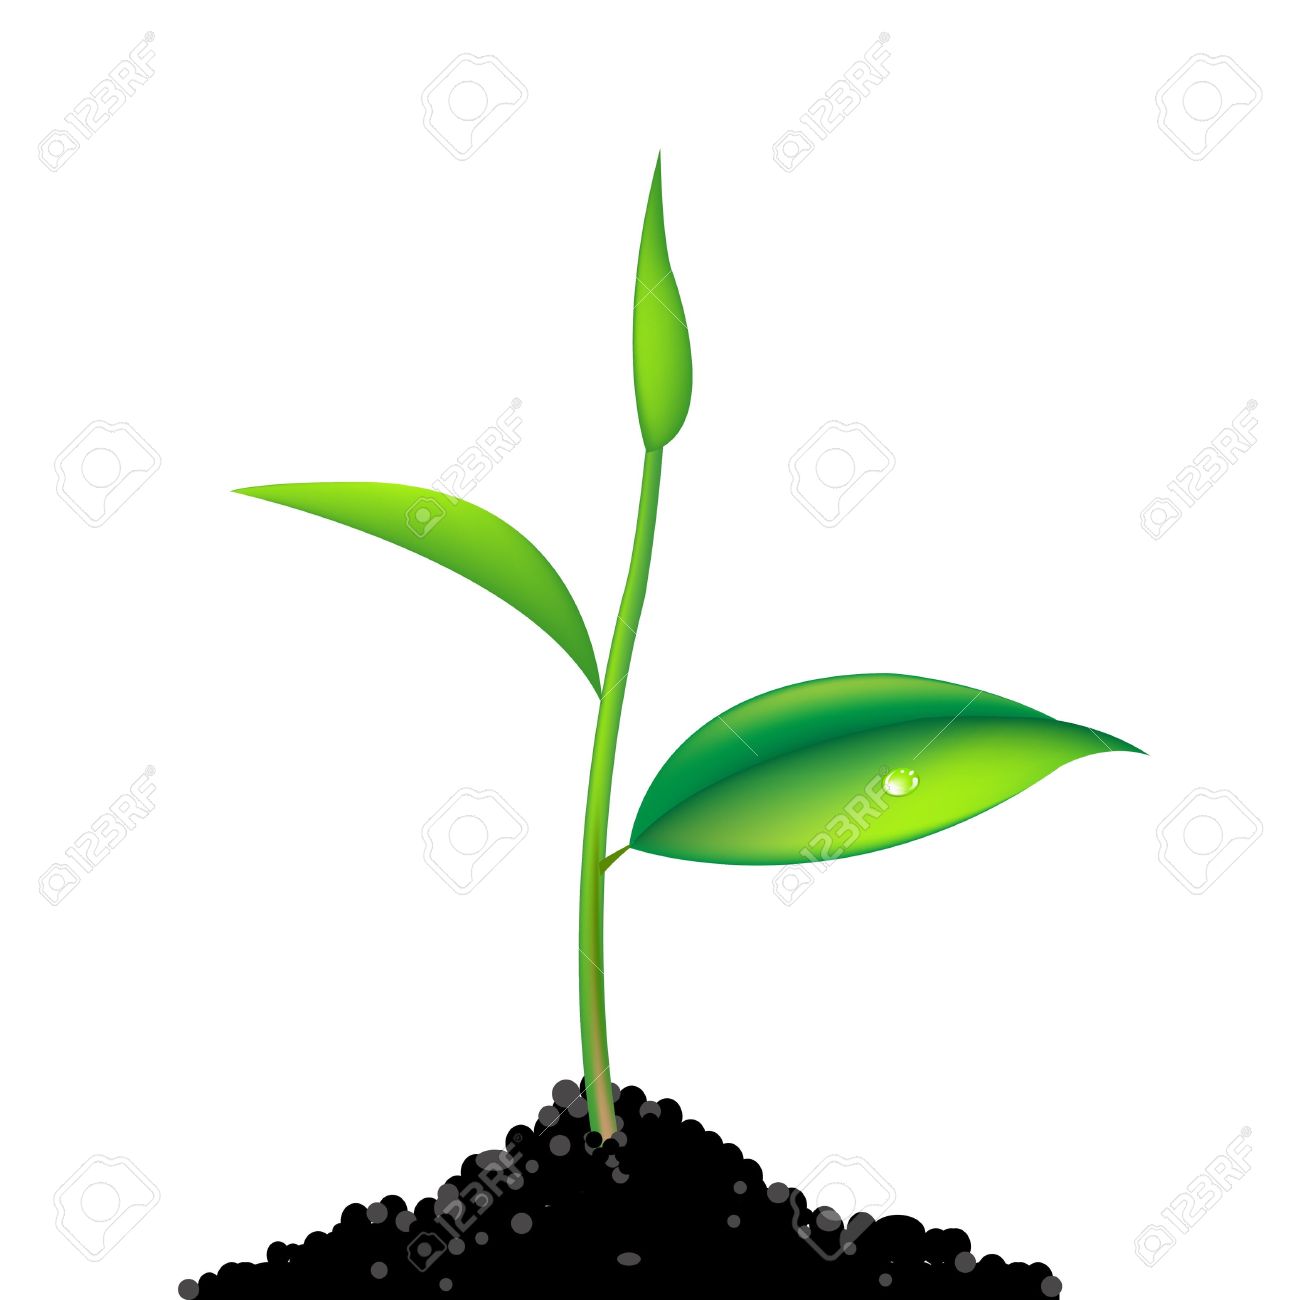 seedling clipart tree sprout